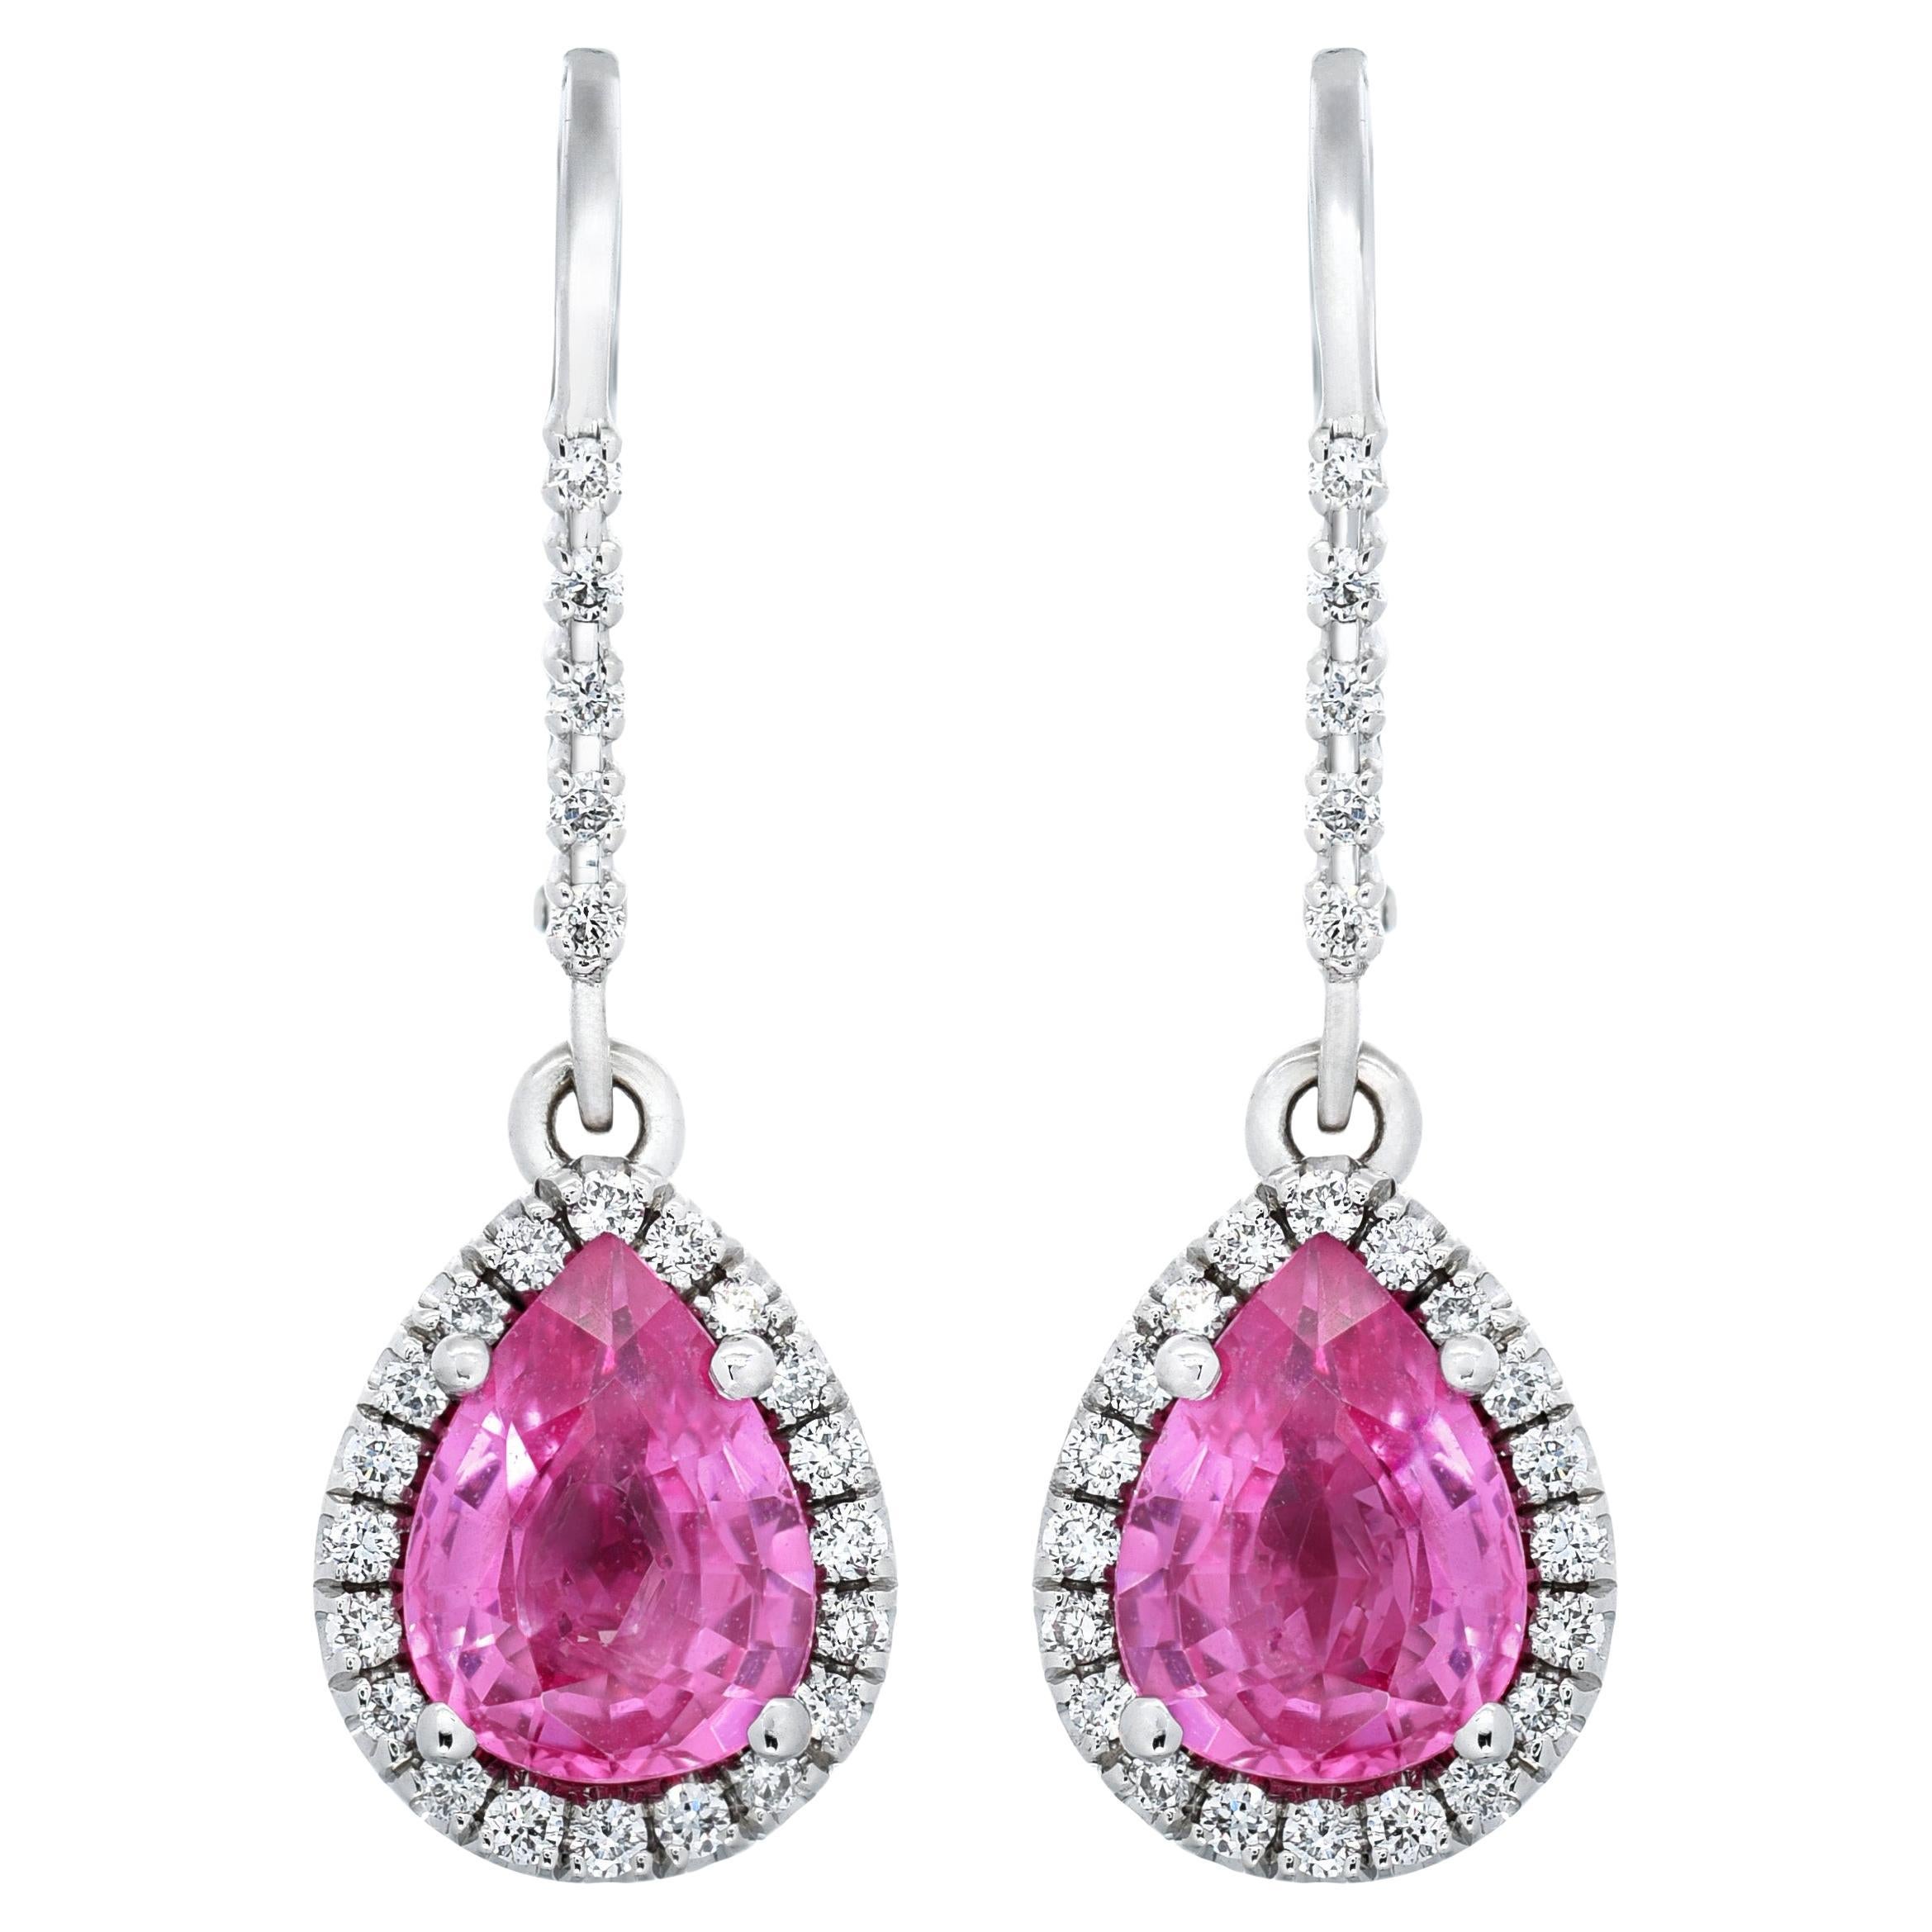 GIA Certified Natural 2.72 Carats Pink Sapphire Earring Diamonds set For Sale